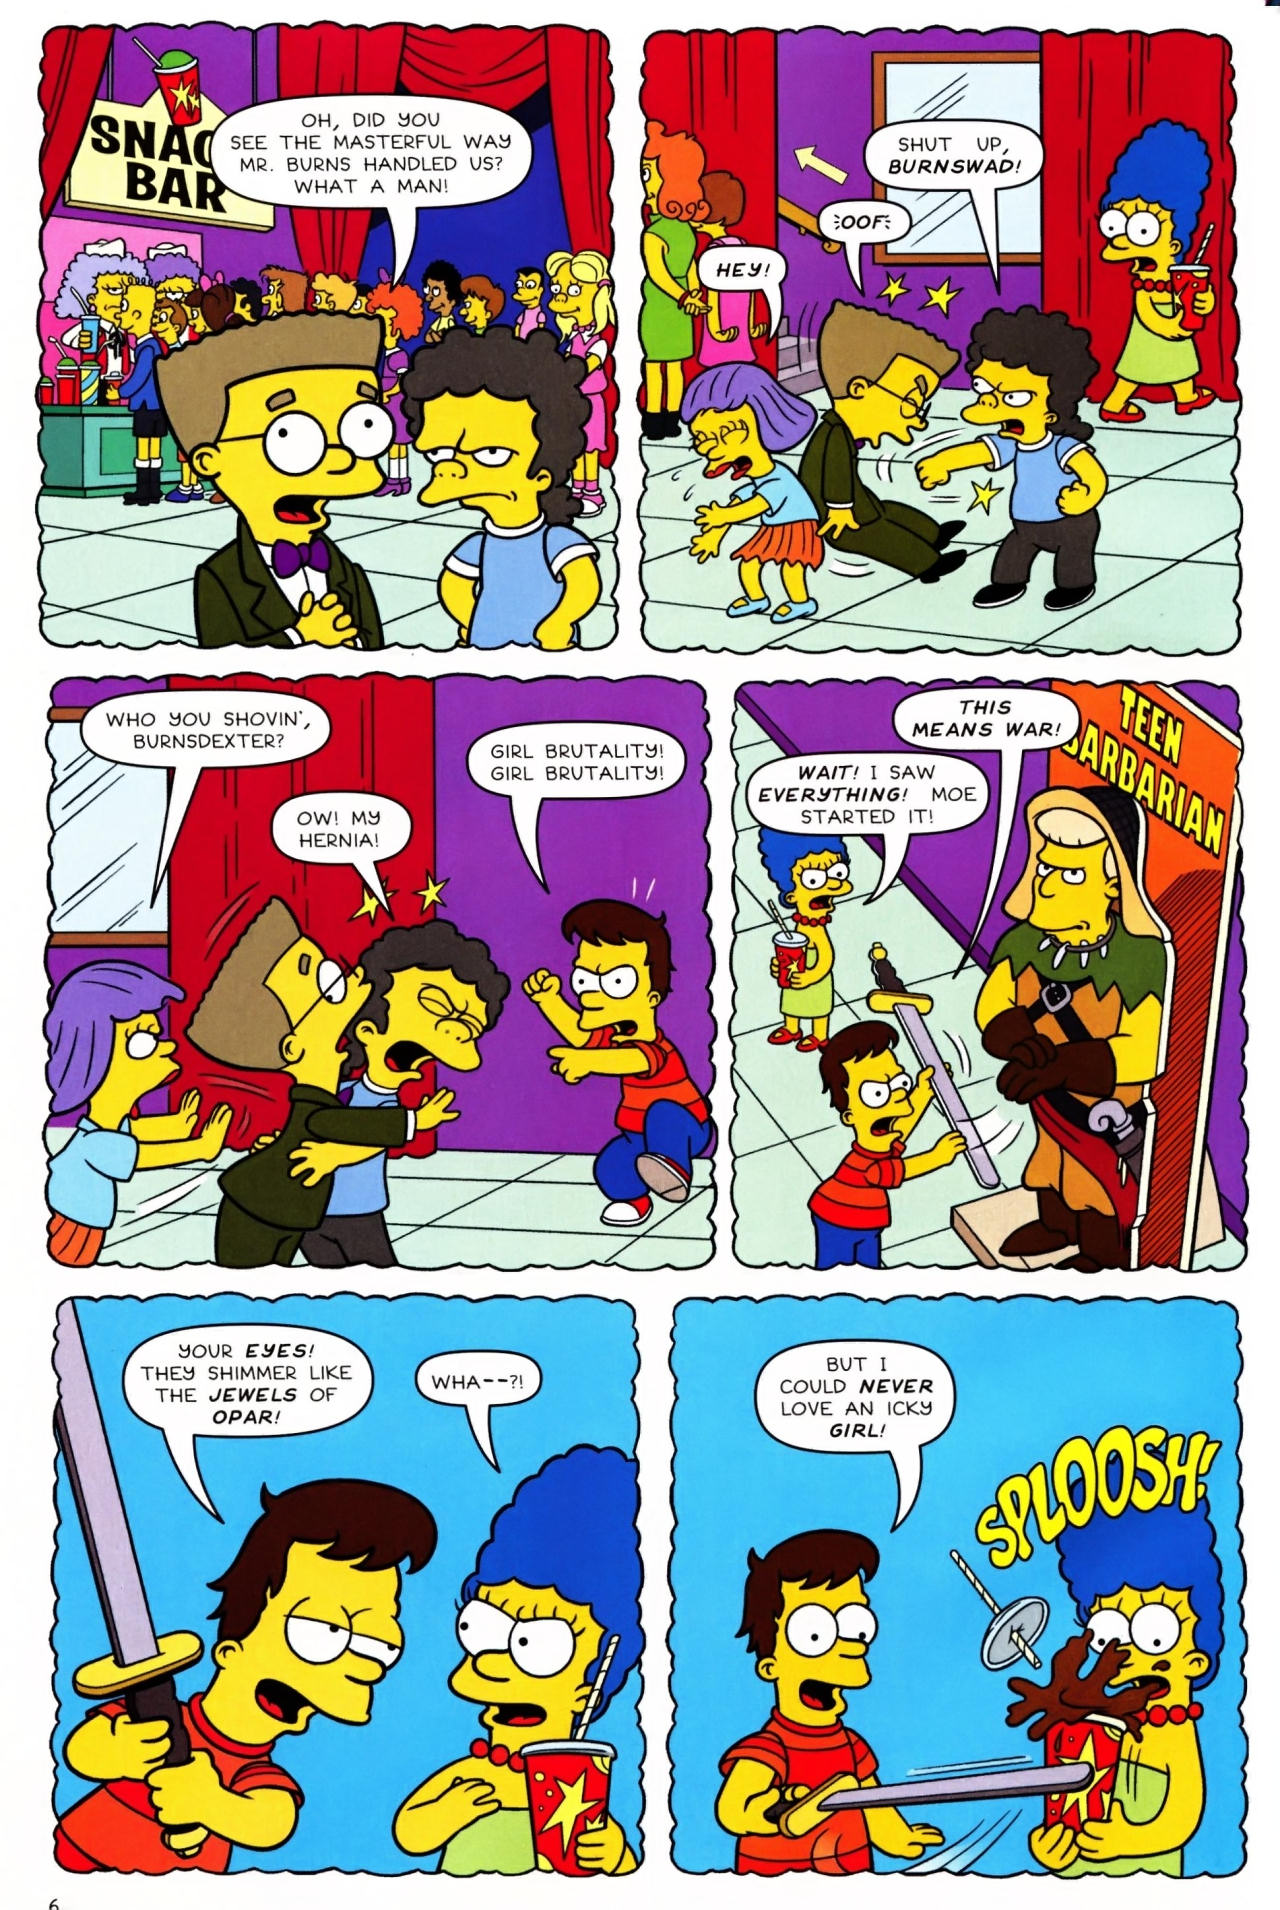 Read online Bart Simpson comic -  Issue #42 - 7